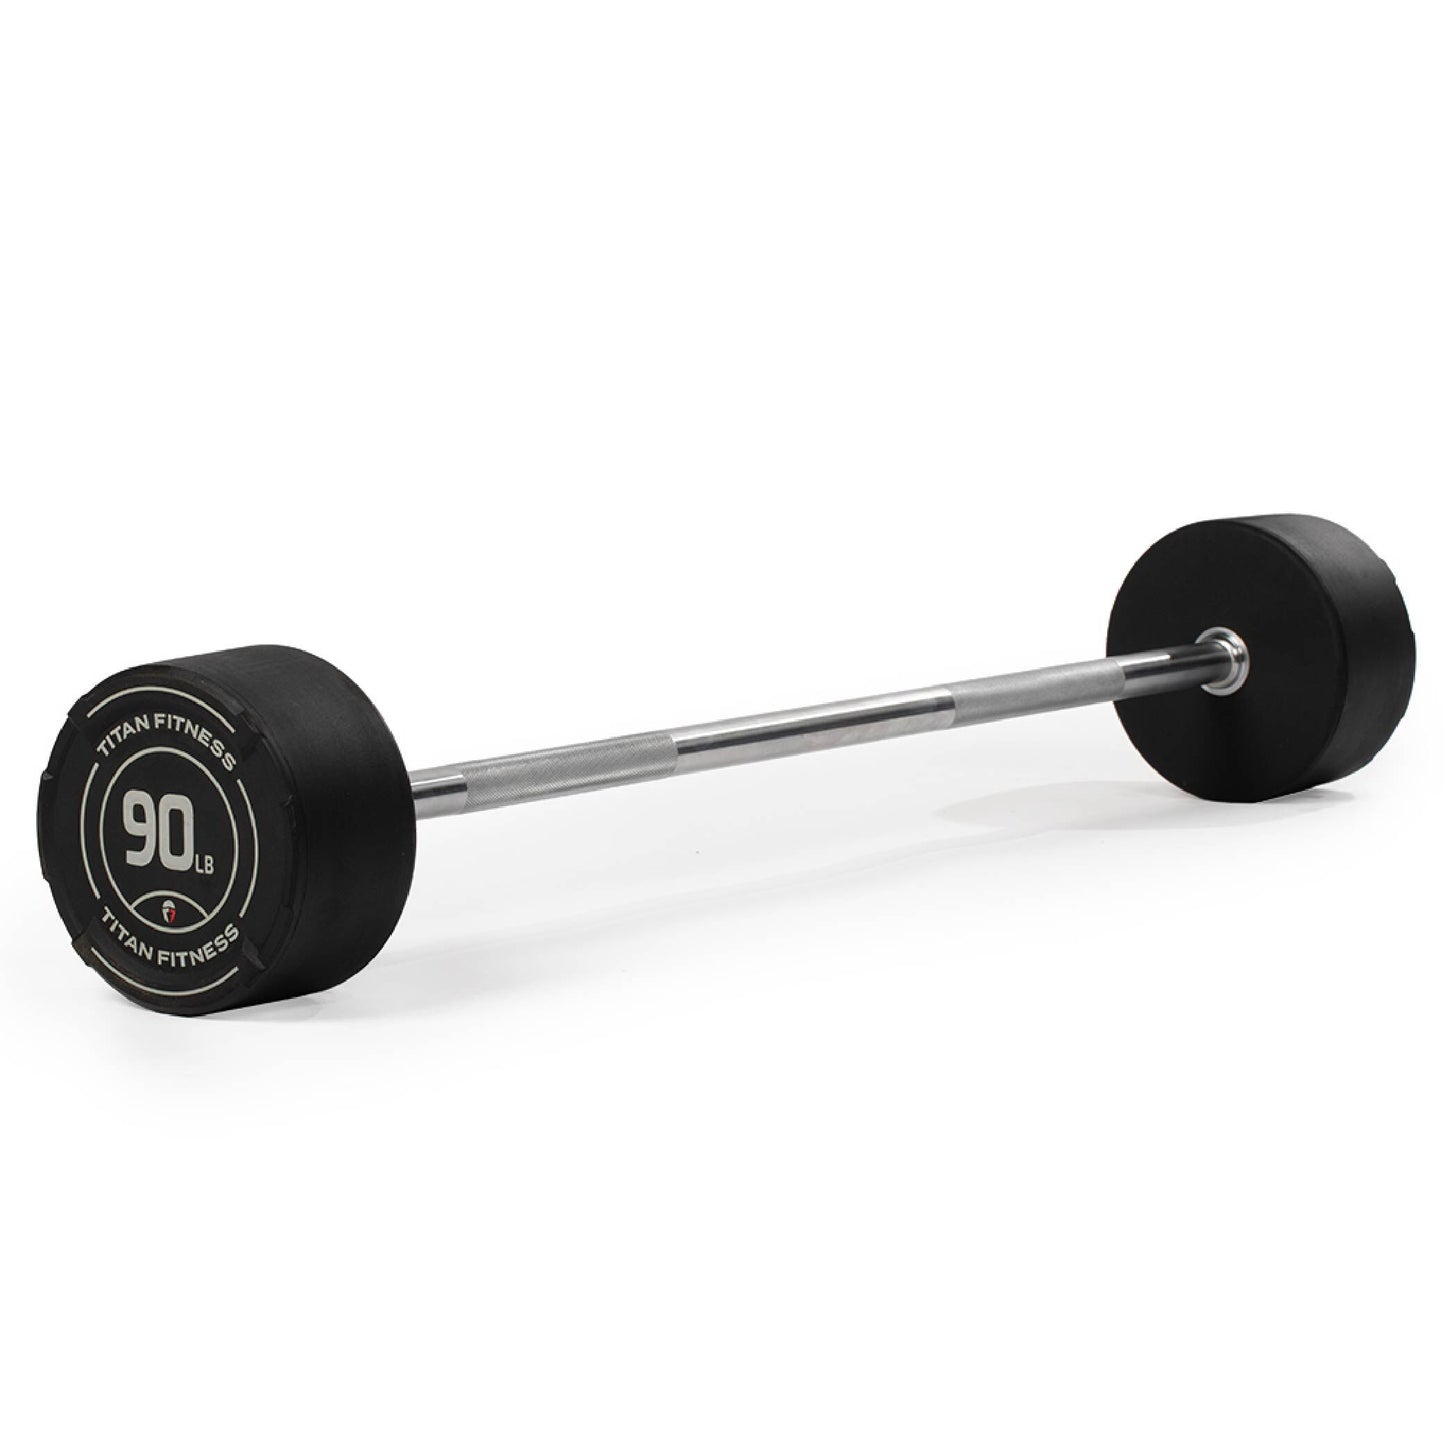 90 LB Straight Fixed Rubber Barbell - view 1